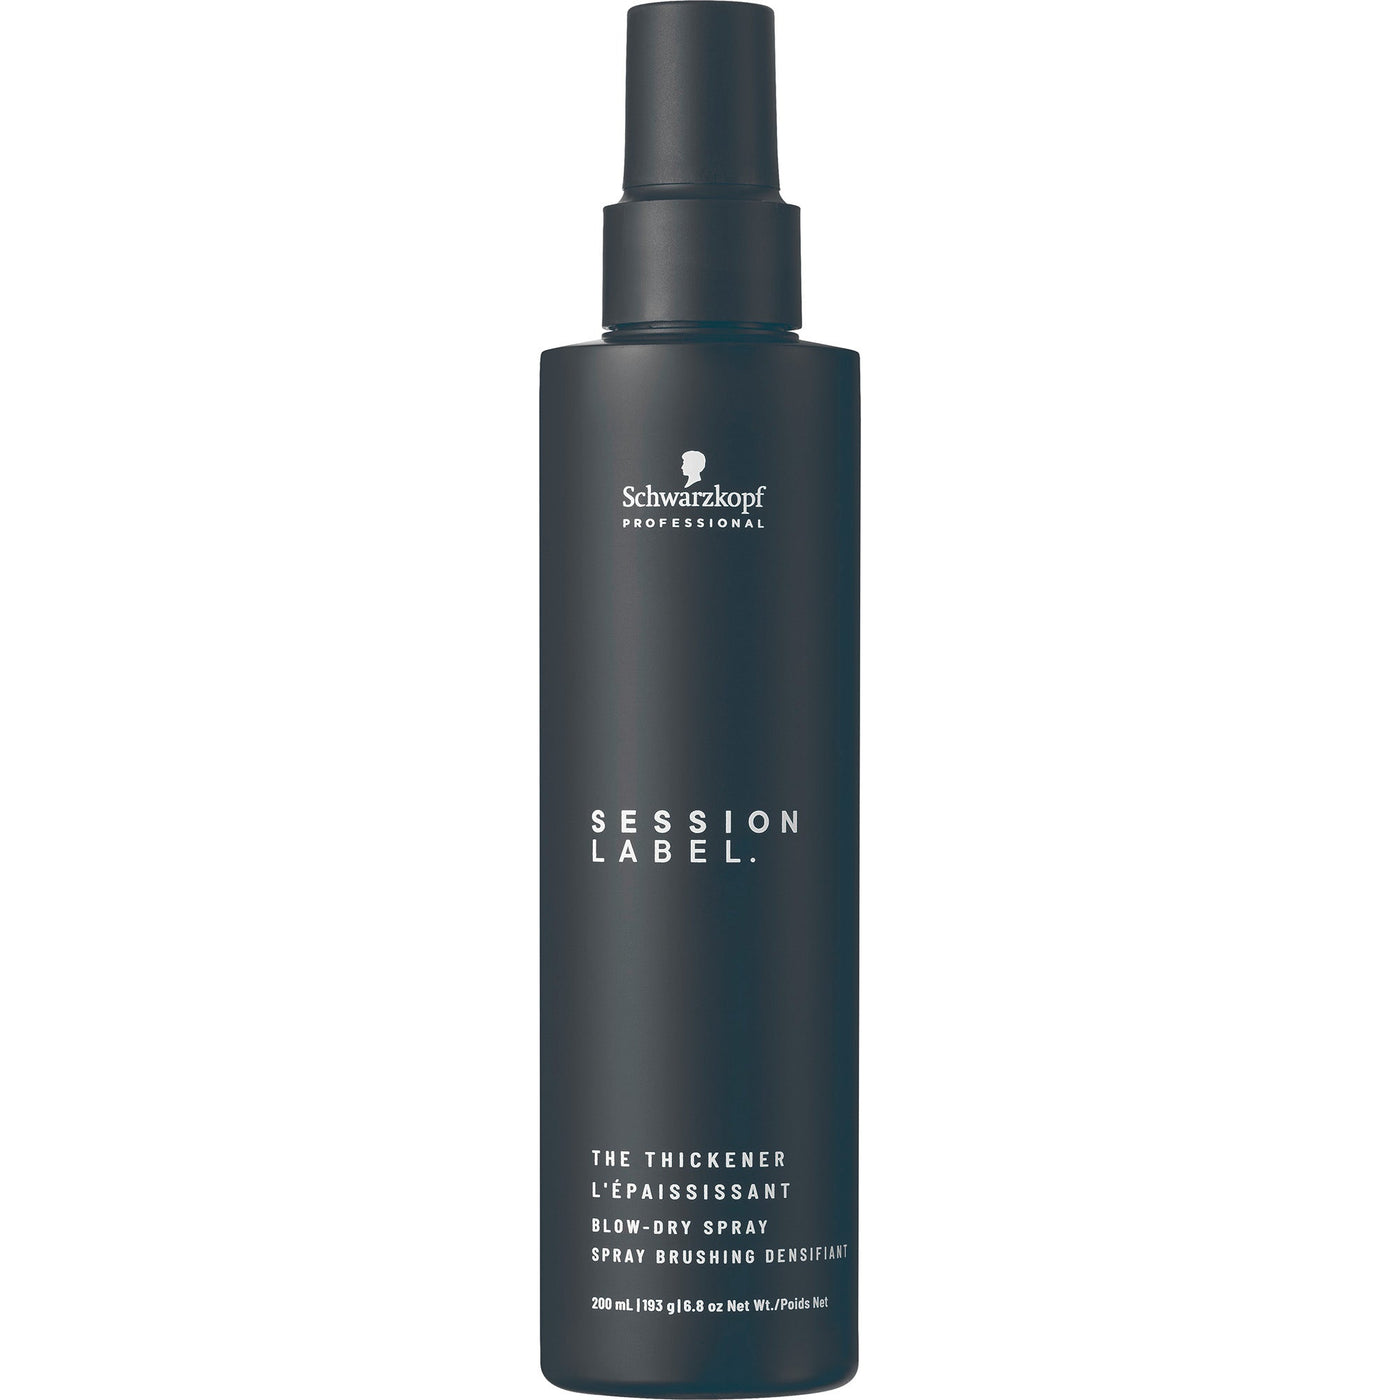 Schwarzkopf Professional Session Label The Thickener (200ml)